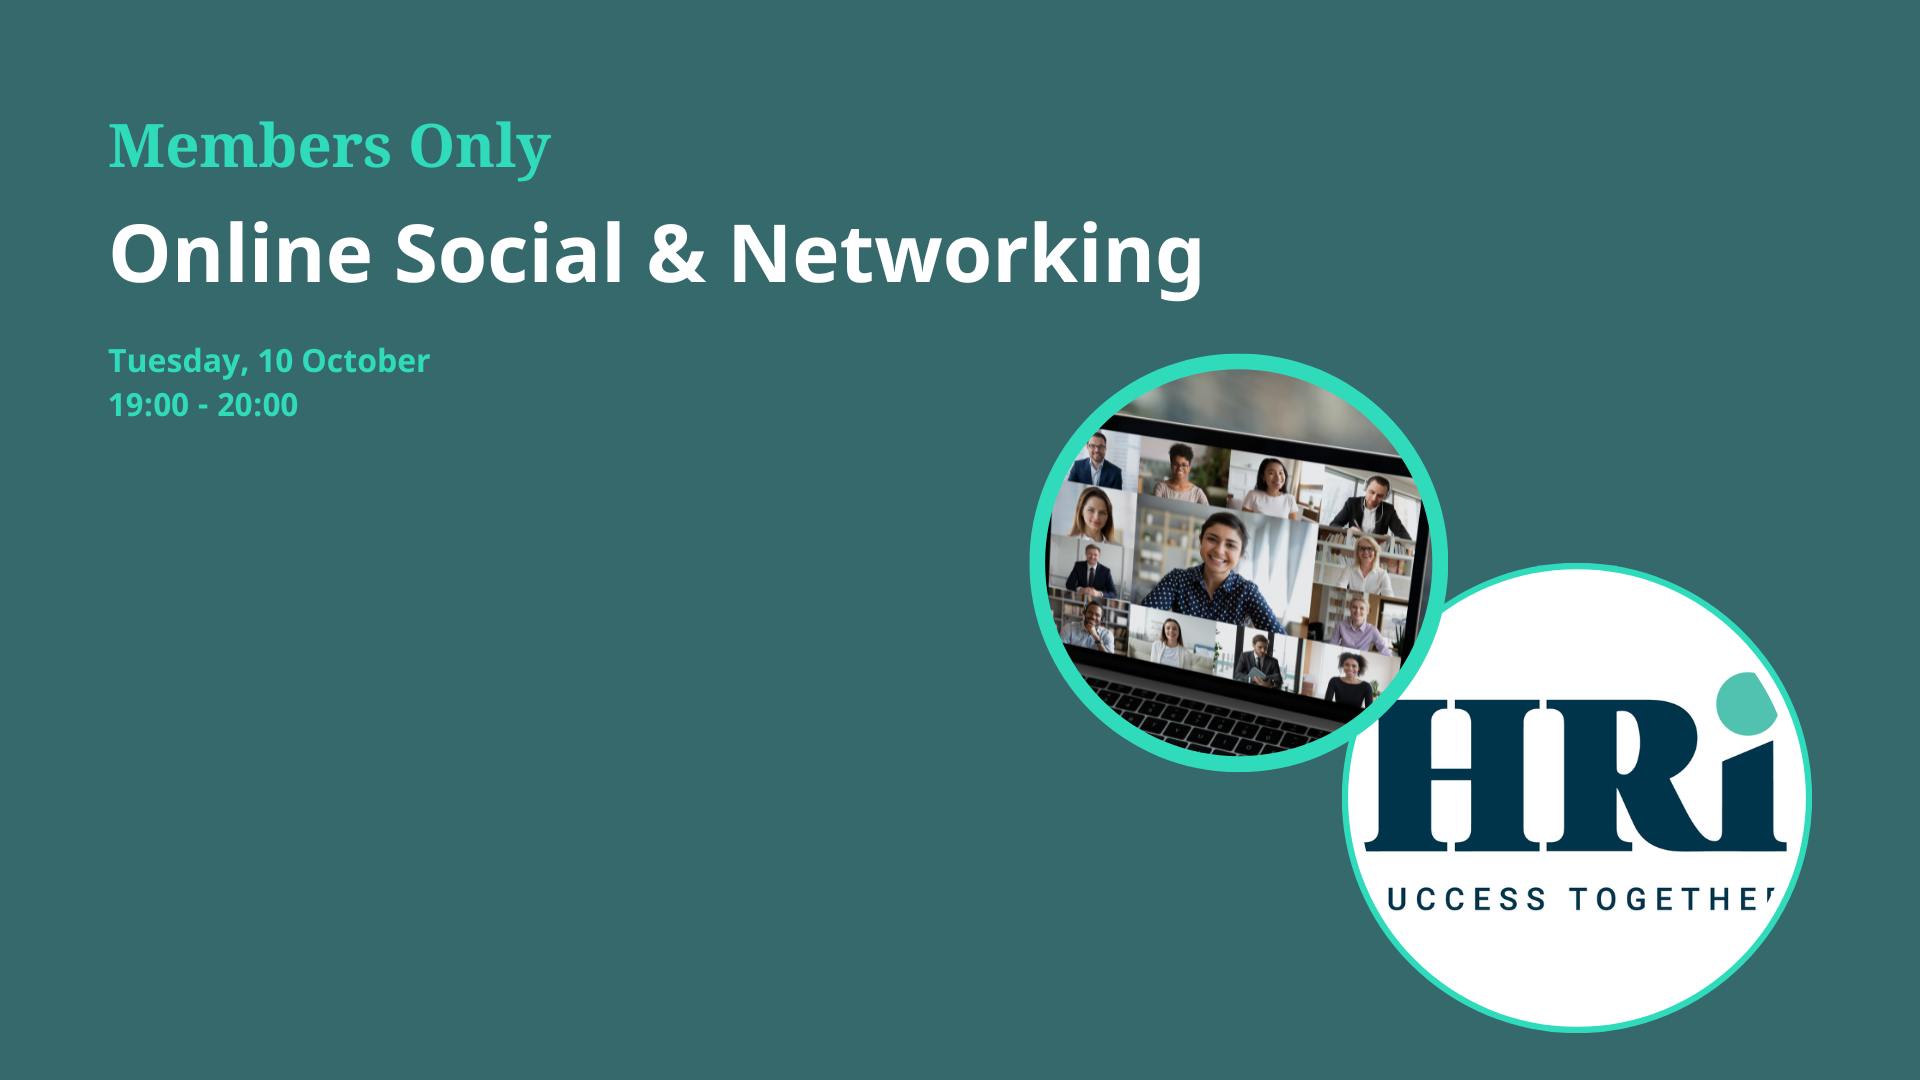 HRi Members Only - Online Social & Networking